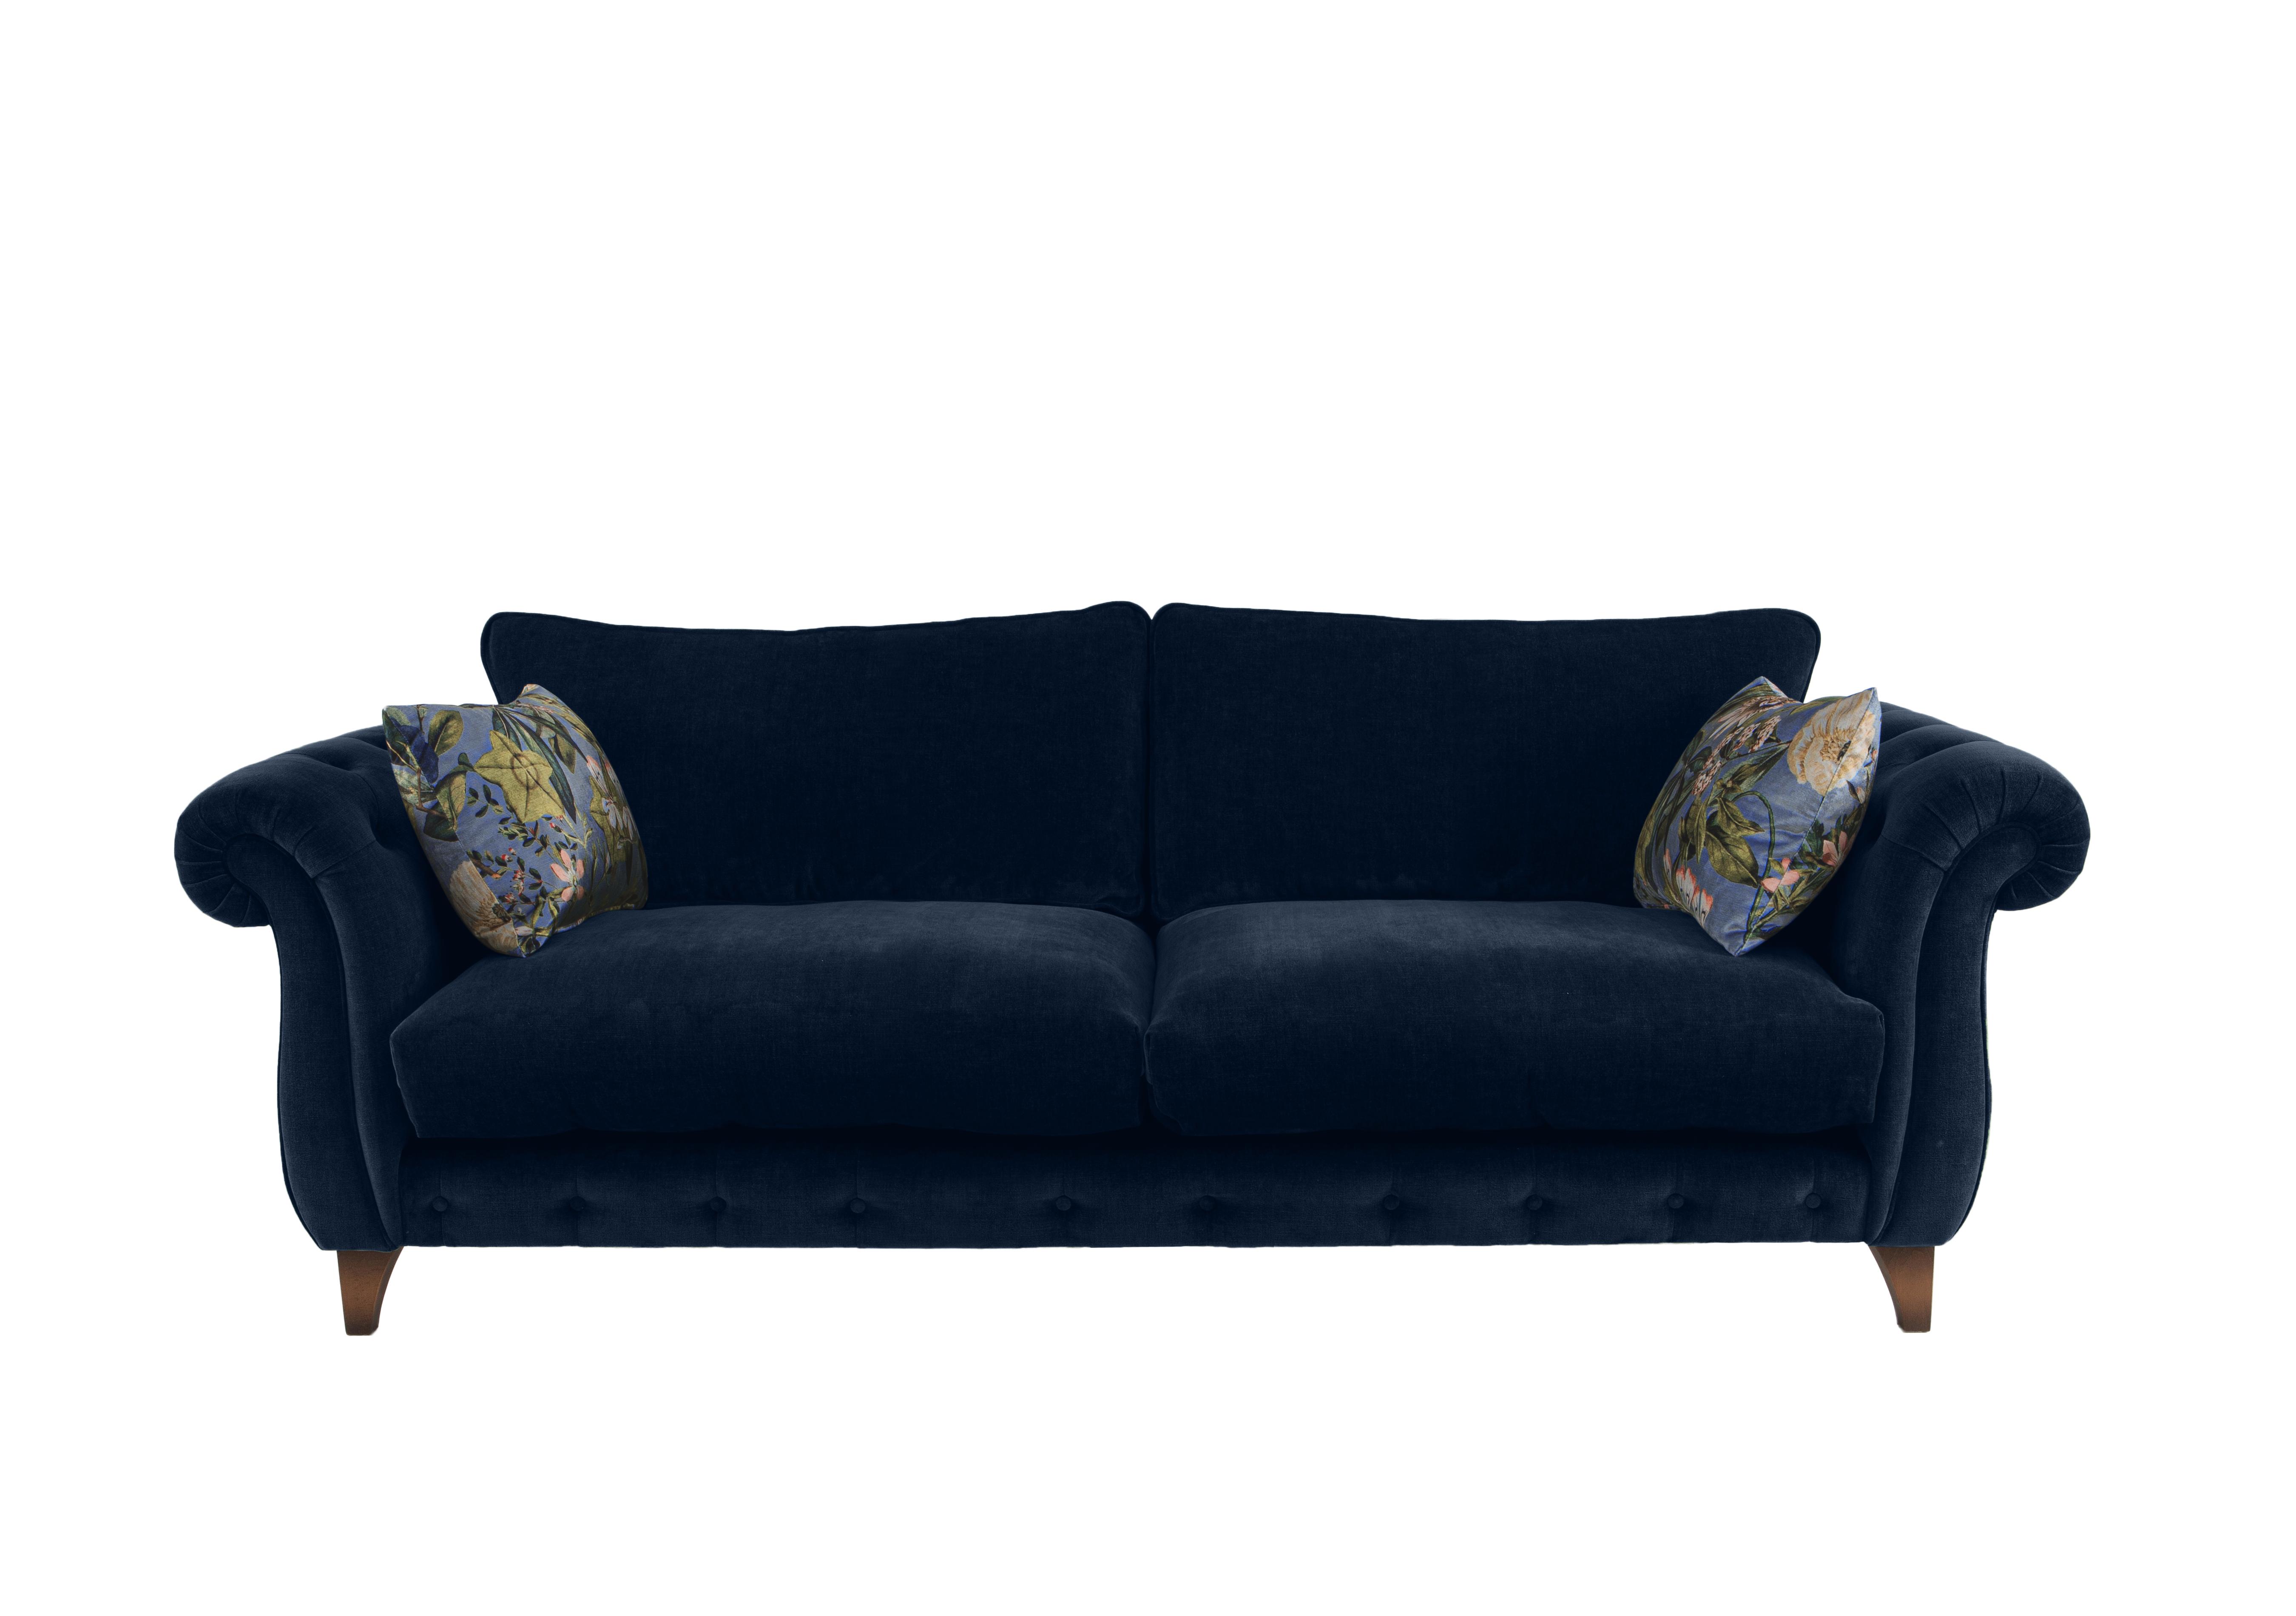 Boutique Palace Fabric 3 Seater Classic Back Sofa in Oasis Navy on Furniture Village